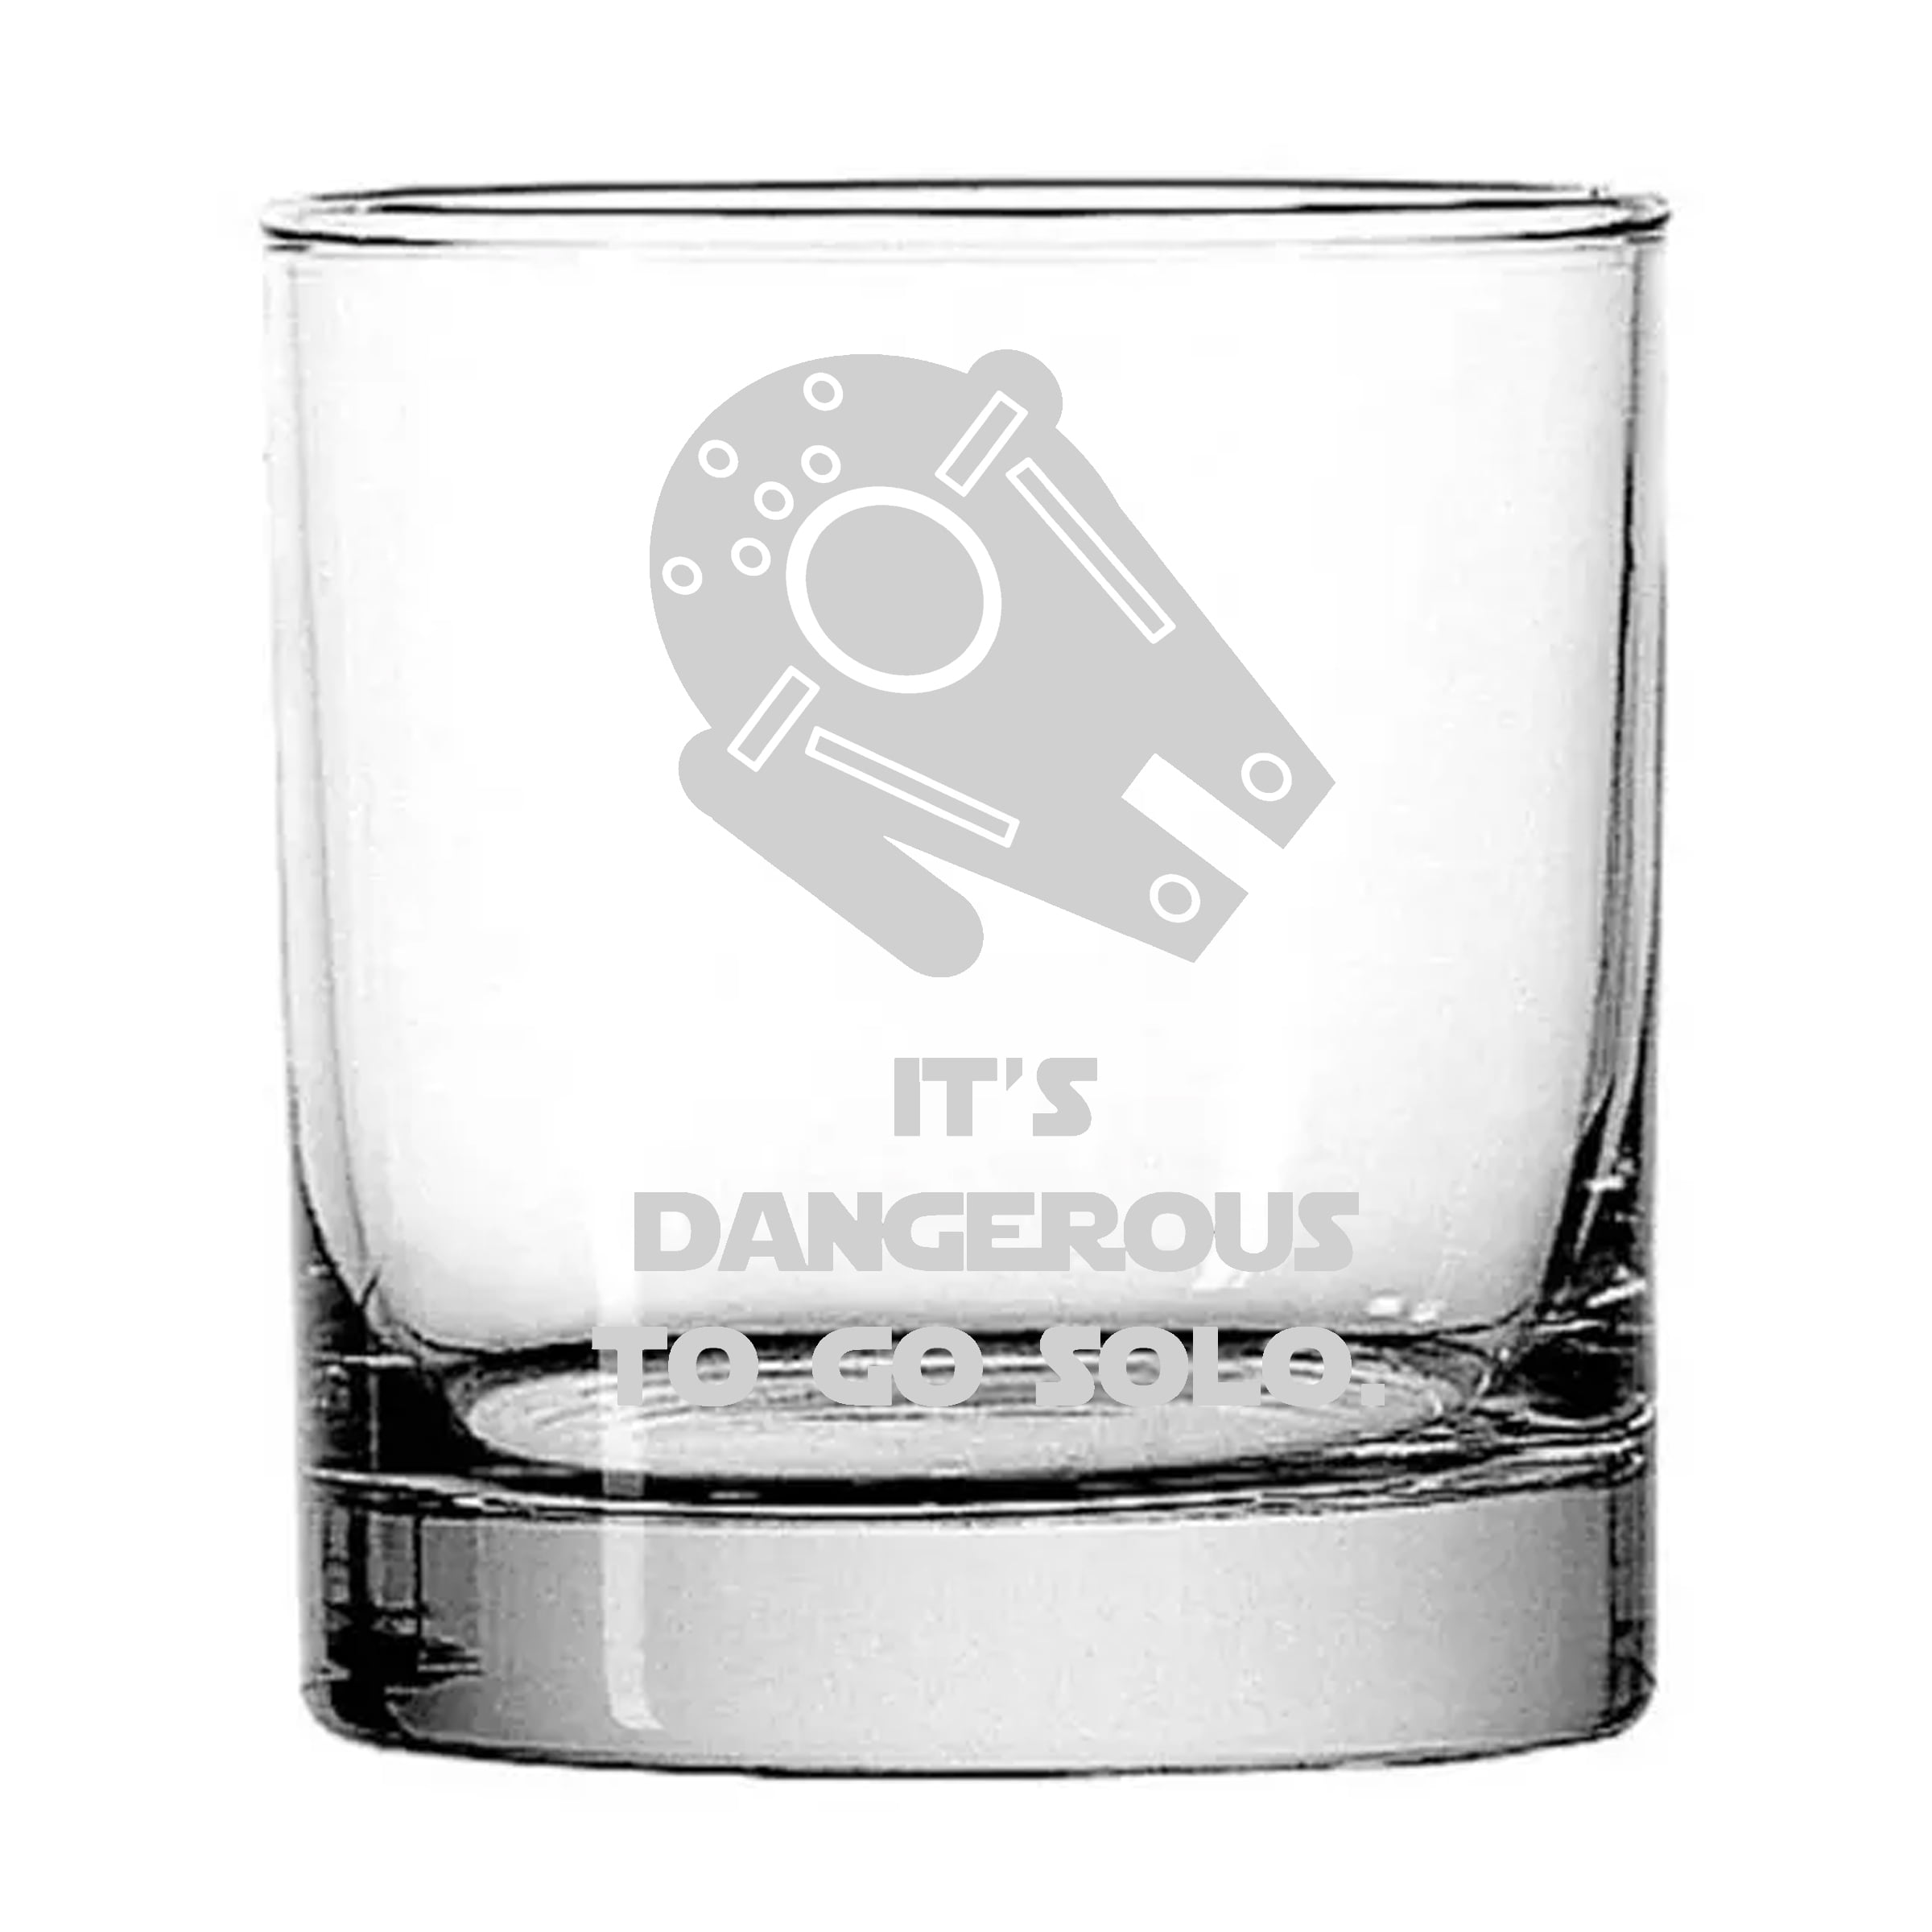 Etched Star SW Wars Pint Glass Set of 4: Pew Pew, Never Tell Me The Odds,  Dangerous To Go Solo, Rebe…See more Etched Star SW Wars Pint Glass Set of  4